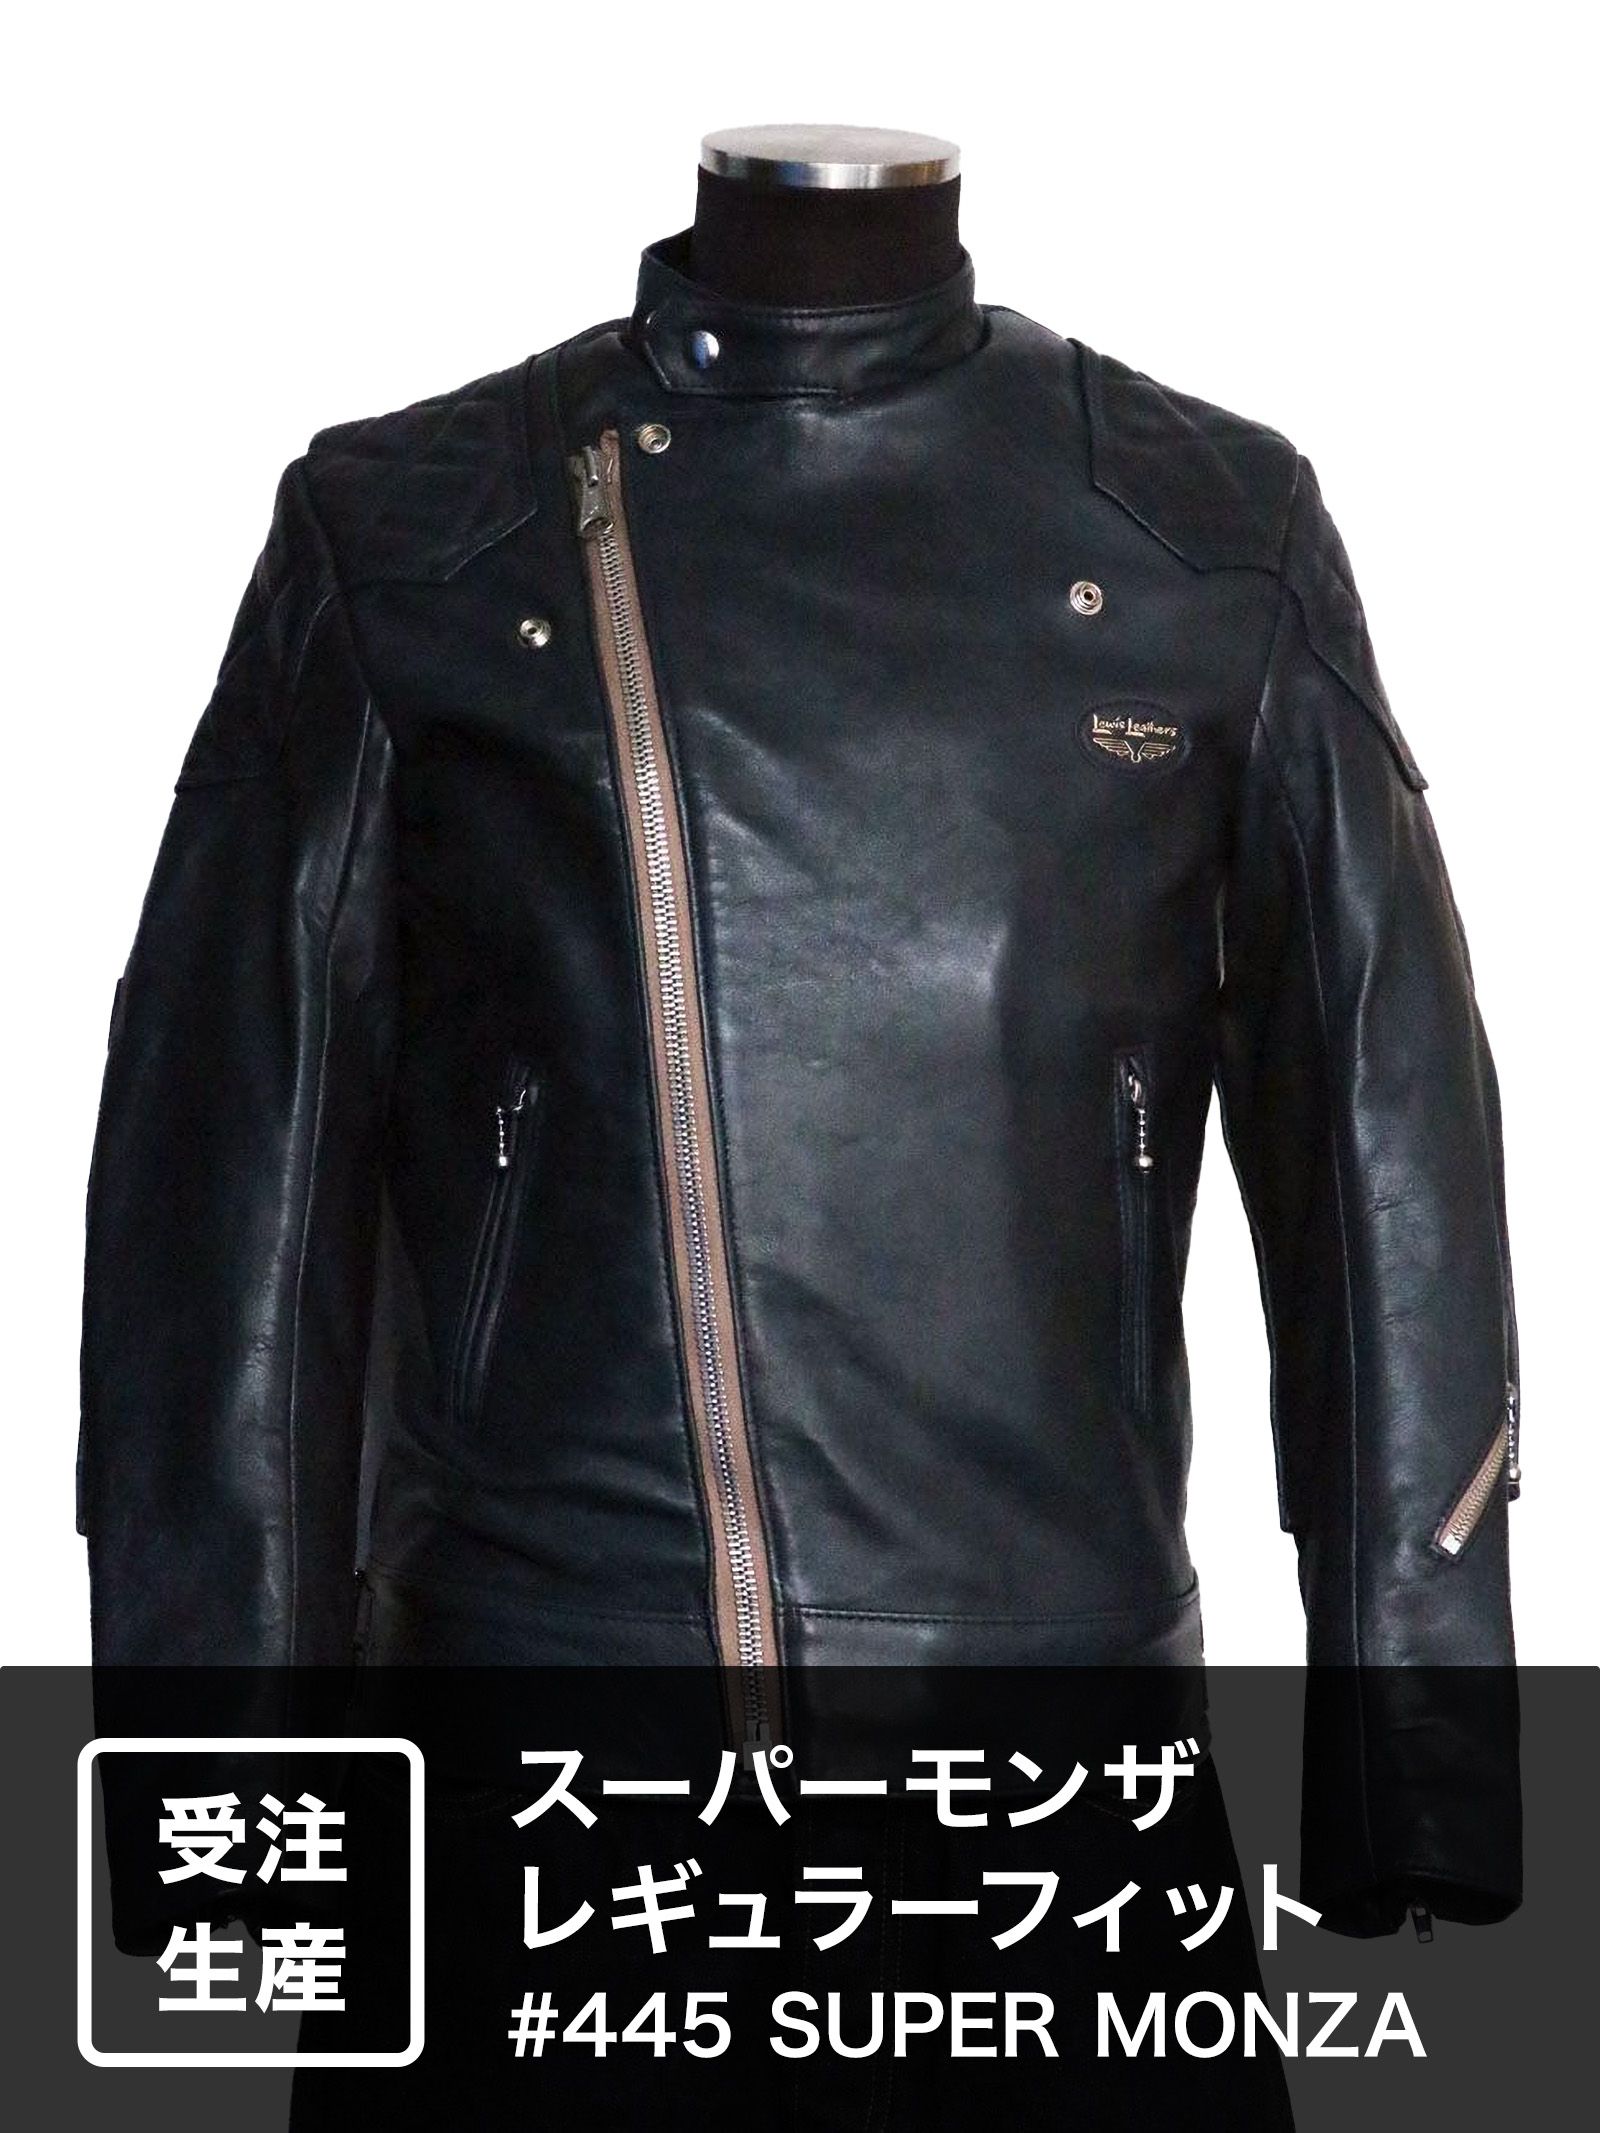 Lewis Leathers - #445 SUPER MONZA REGULAR FIT / スーパーモンザ